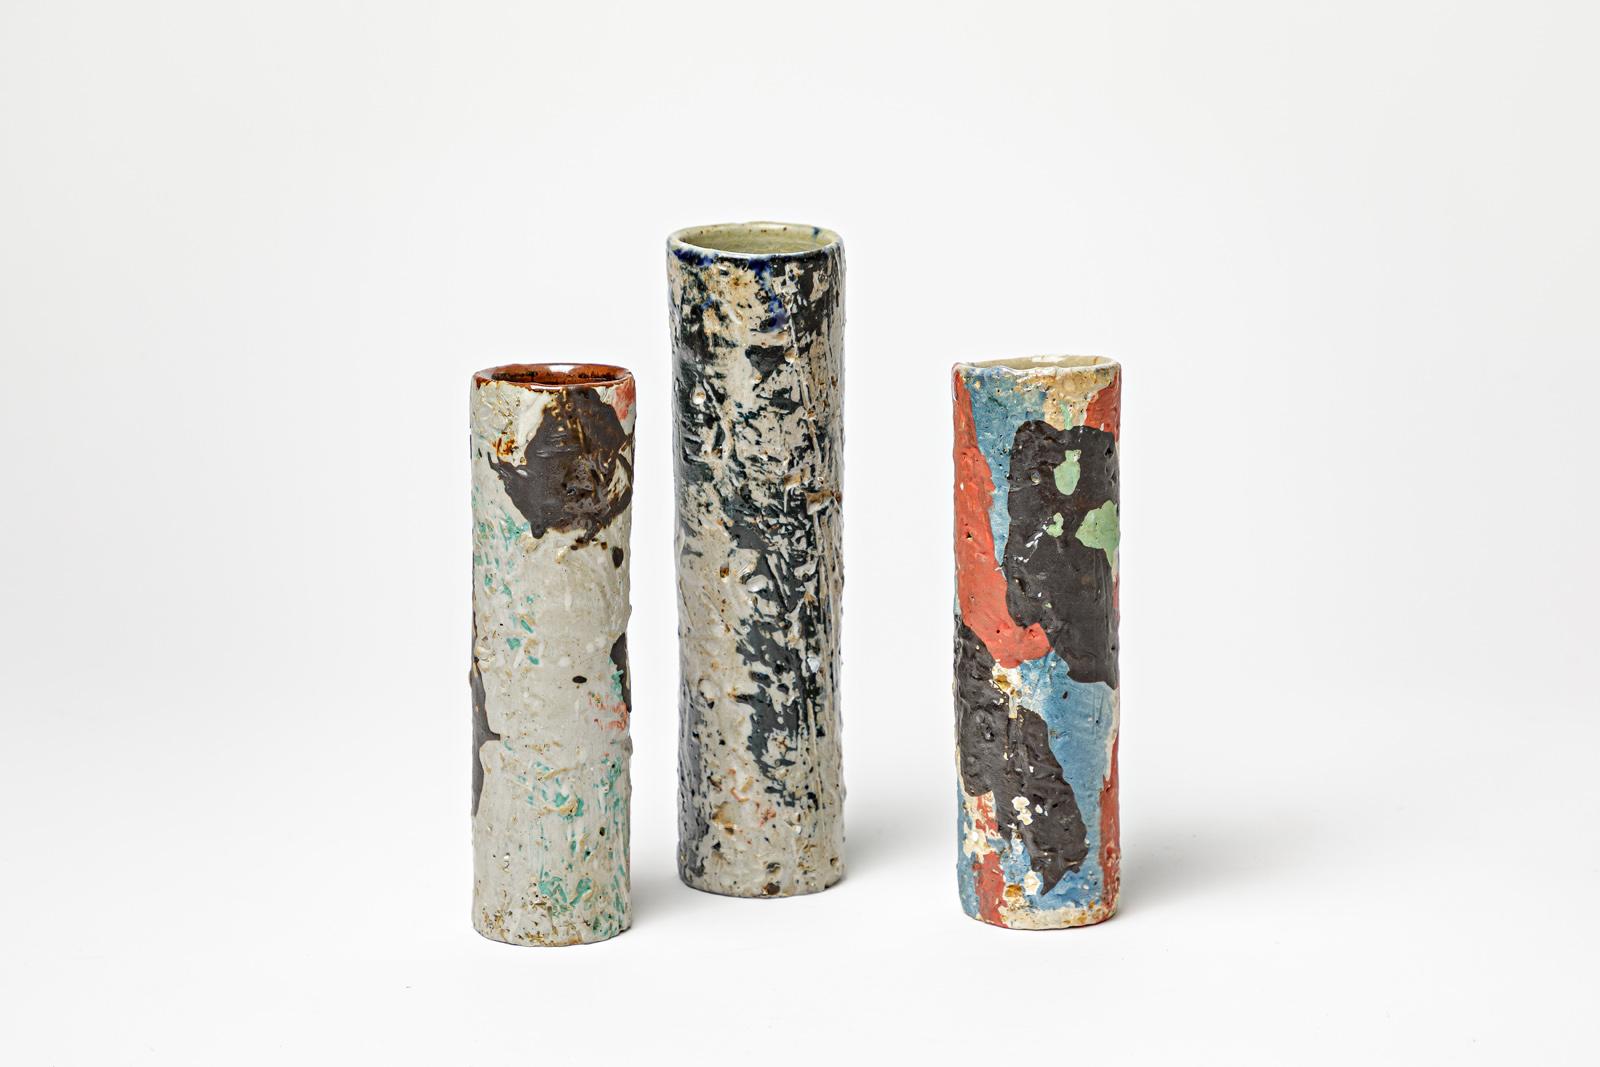 David Whitehead

Realised circa 2010

Set of three ceramic vases signed by David Whitehead

Original perfect conditions

Number one height 16 cm
Number two height 16 cm
Number 3 height 19 cm